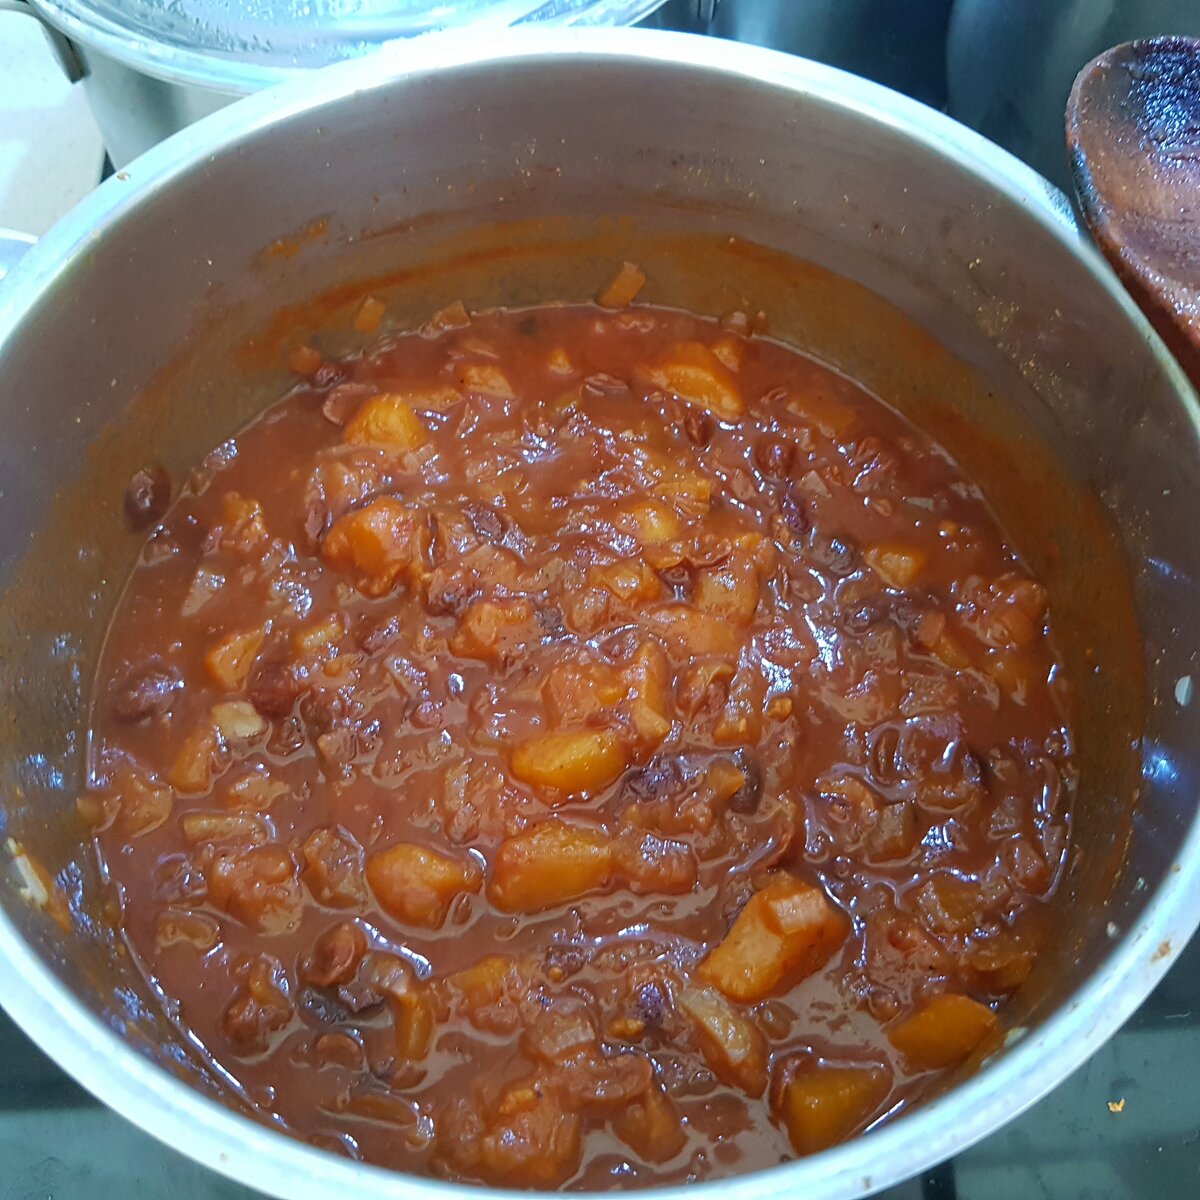 In the pot, spicy pear chutney